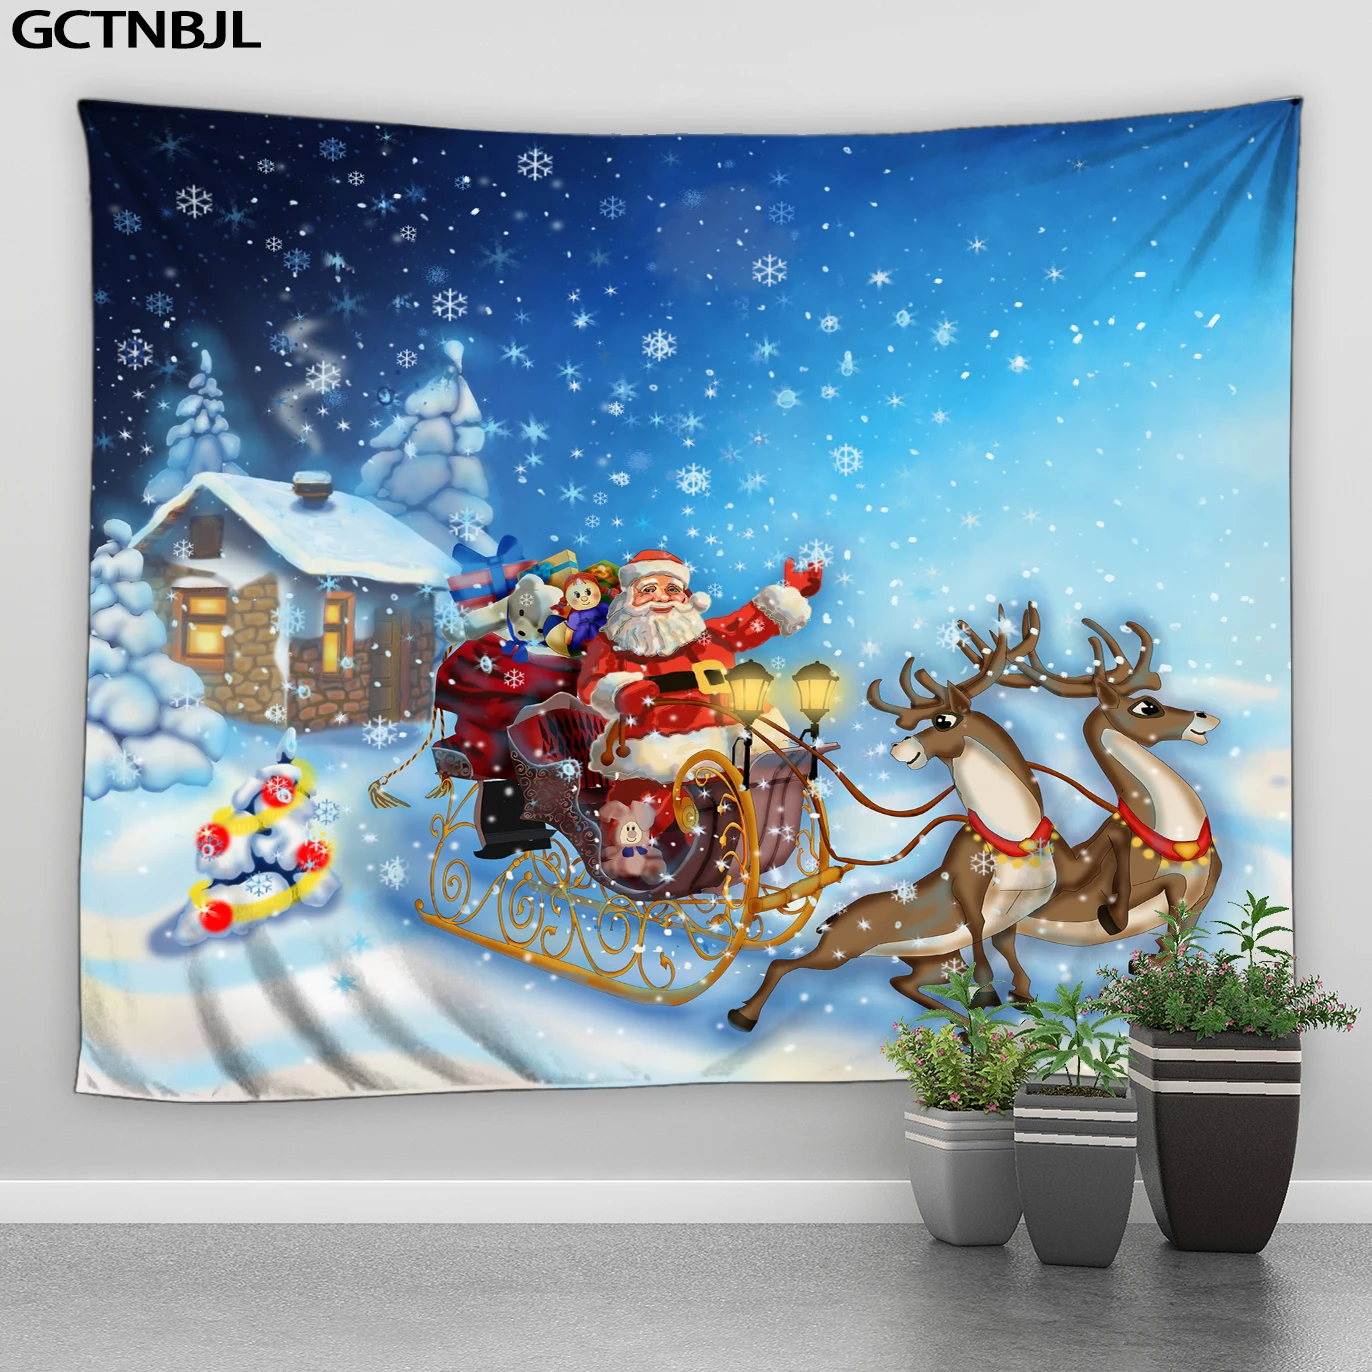 

Christmas Tapestry Santa Claus Snowman Reindeer Fireplace Wall Hanging Tapestries Holiday Decor Hippie Bedroom Boho Big Blanket